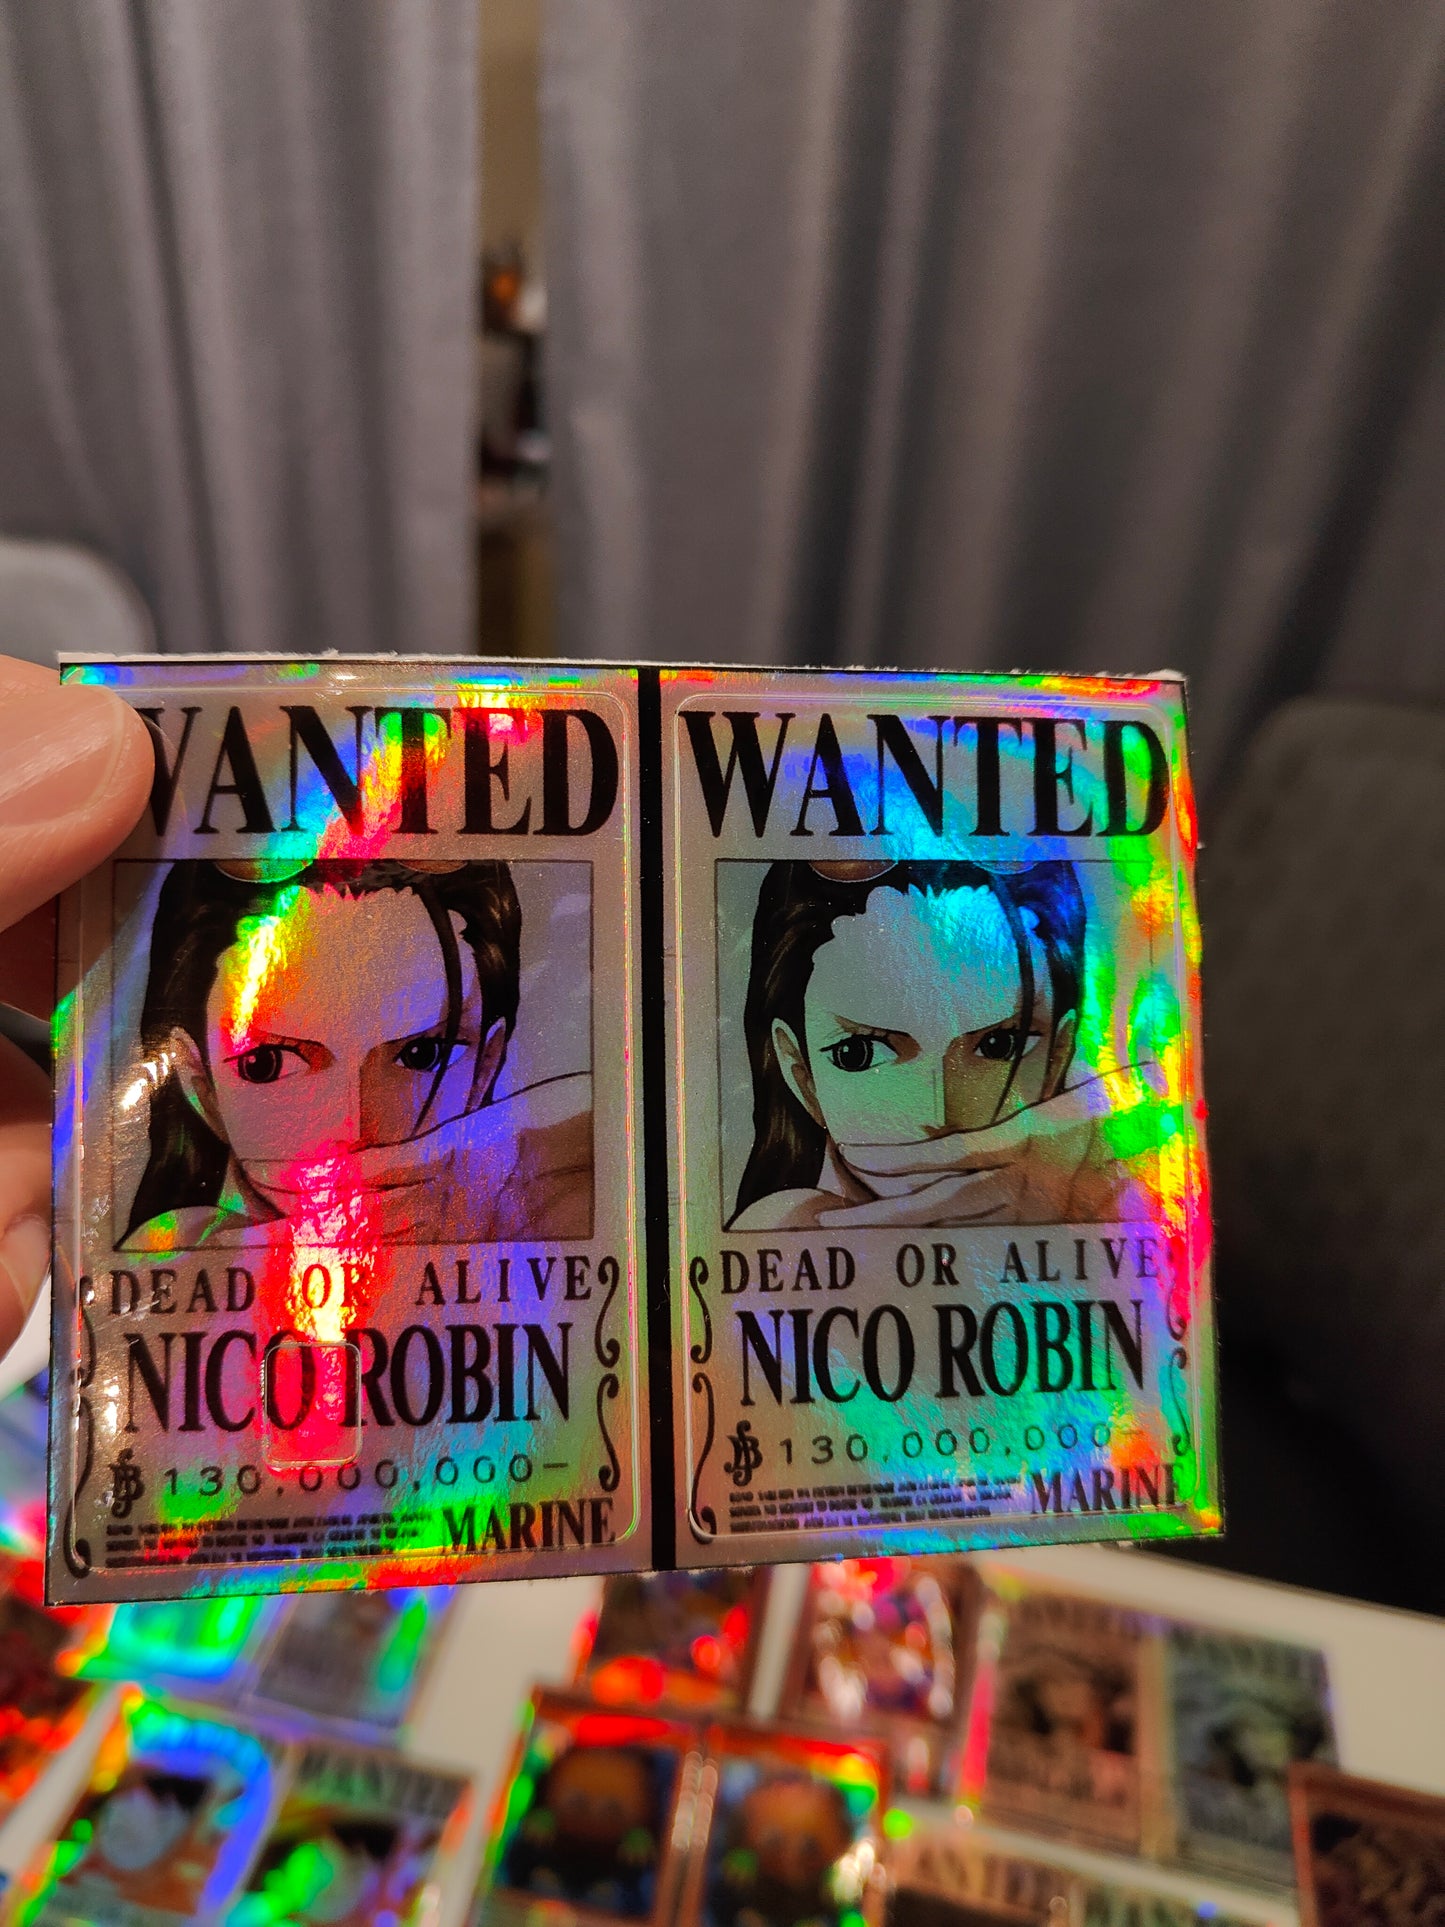 One Piece - Nico Robin Wanted Poster Holographic Credit Card Sticker (Please Read Description)